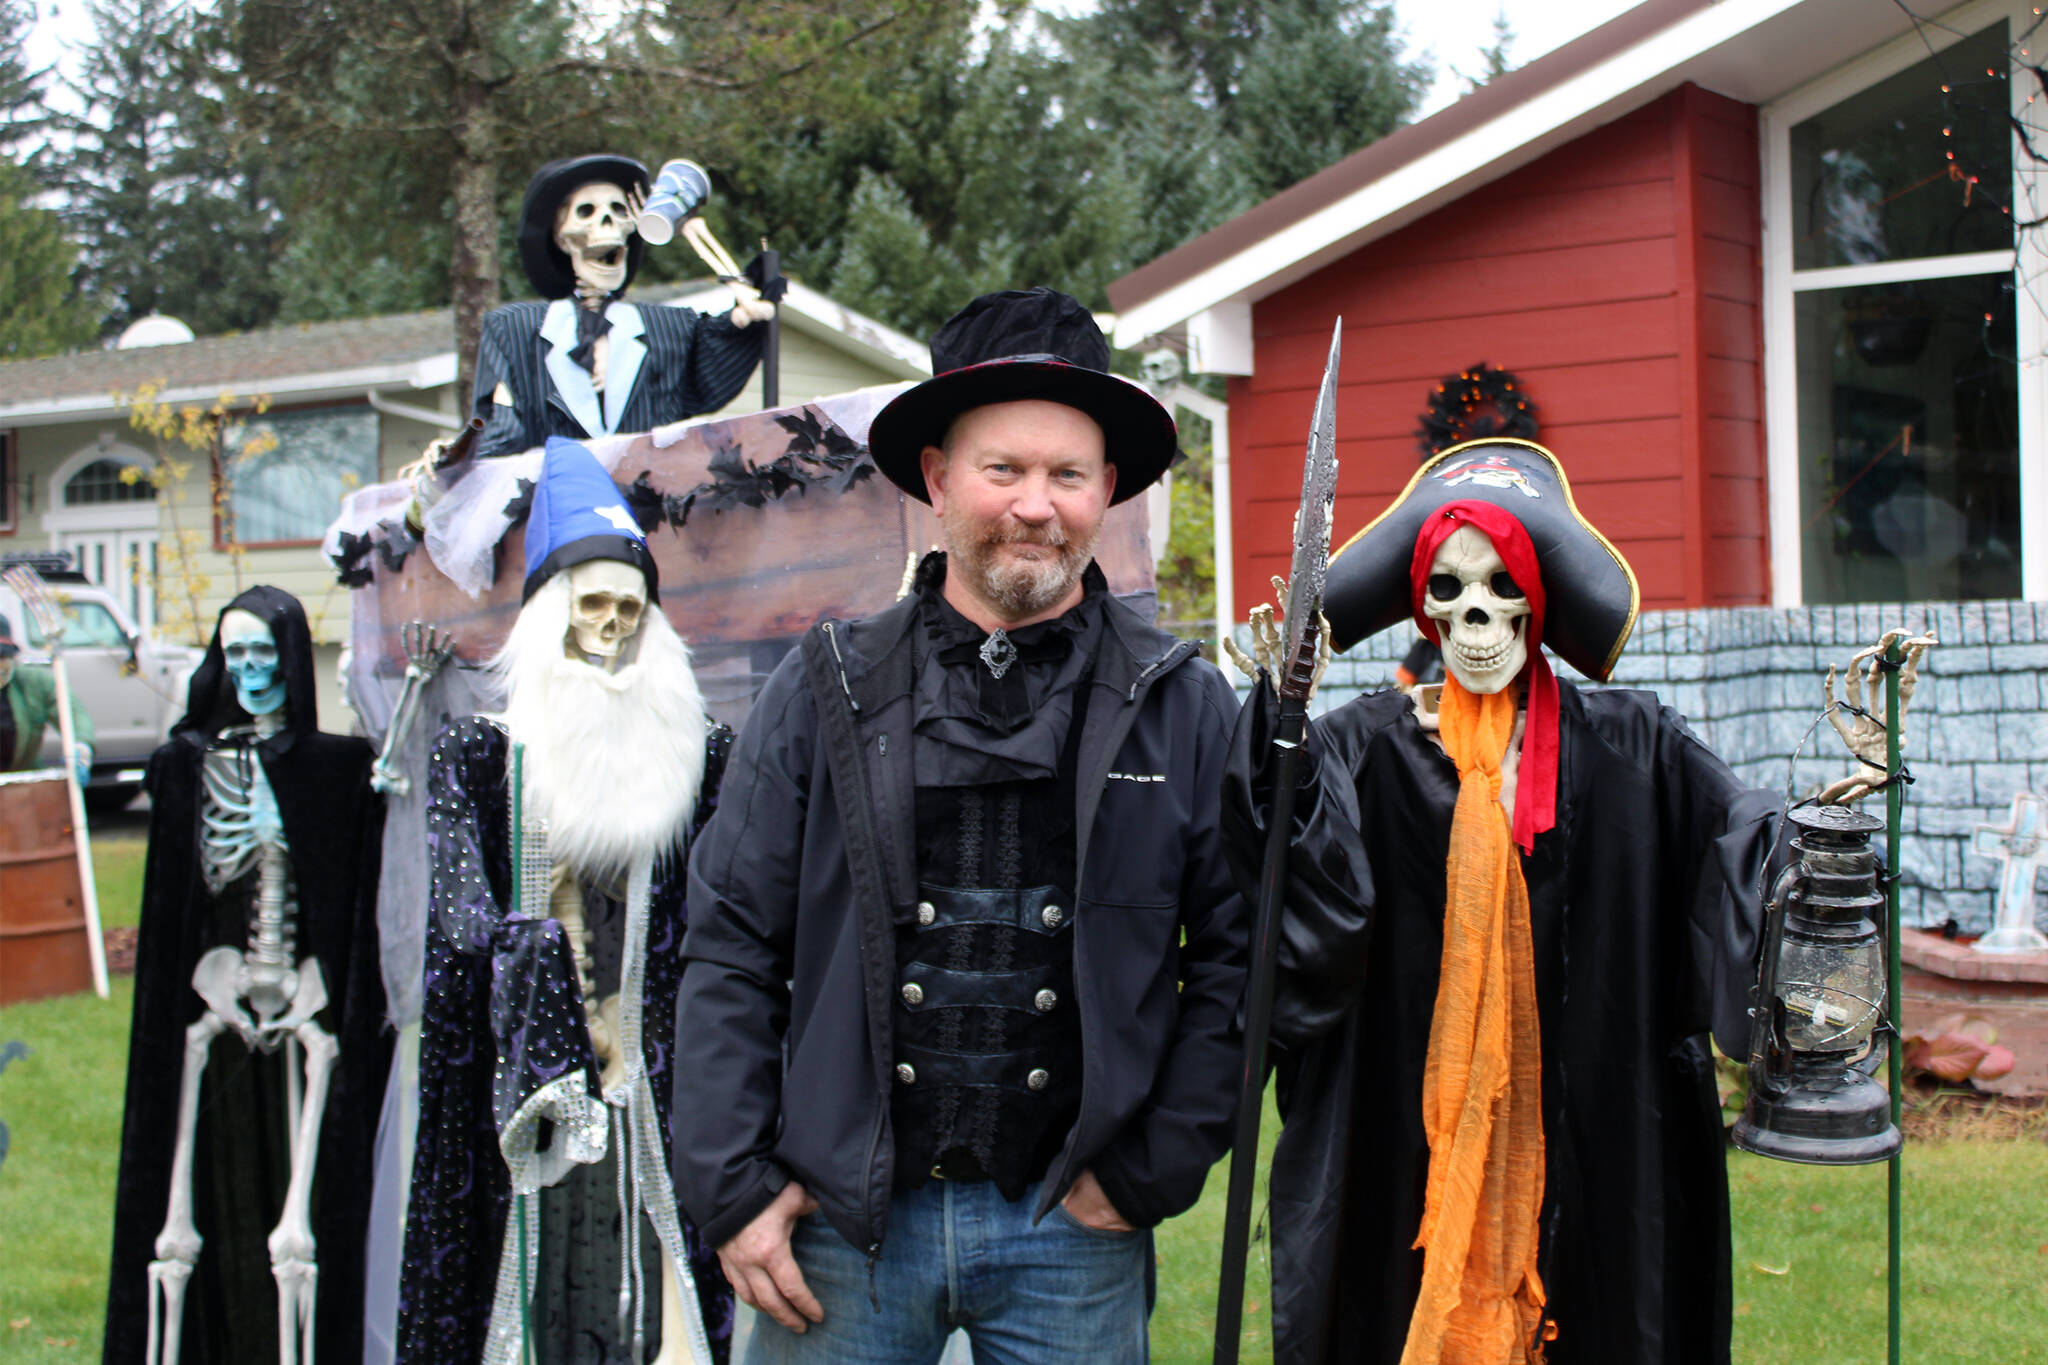 On Oct. 26, Dan Earls stands among some of the ghosts and ghouls that greet people who visit the haunted garage he constructs at his home each year. Earls, who lives at 9420 Berners Ave., welcomes hundreds of people a season through his display, which winds through his garage and spreads onto a neighbor’s yard. (Dana Zigmund/Juneau Empire)